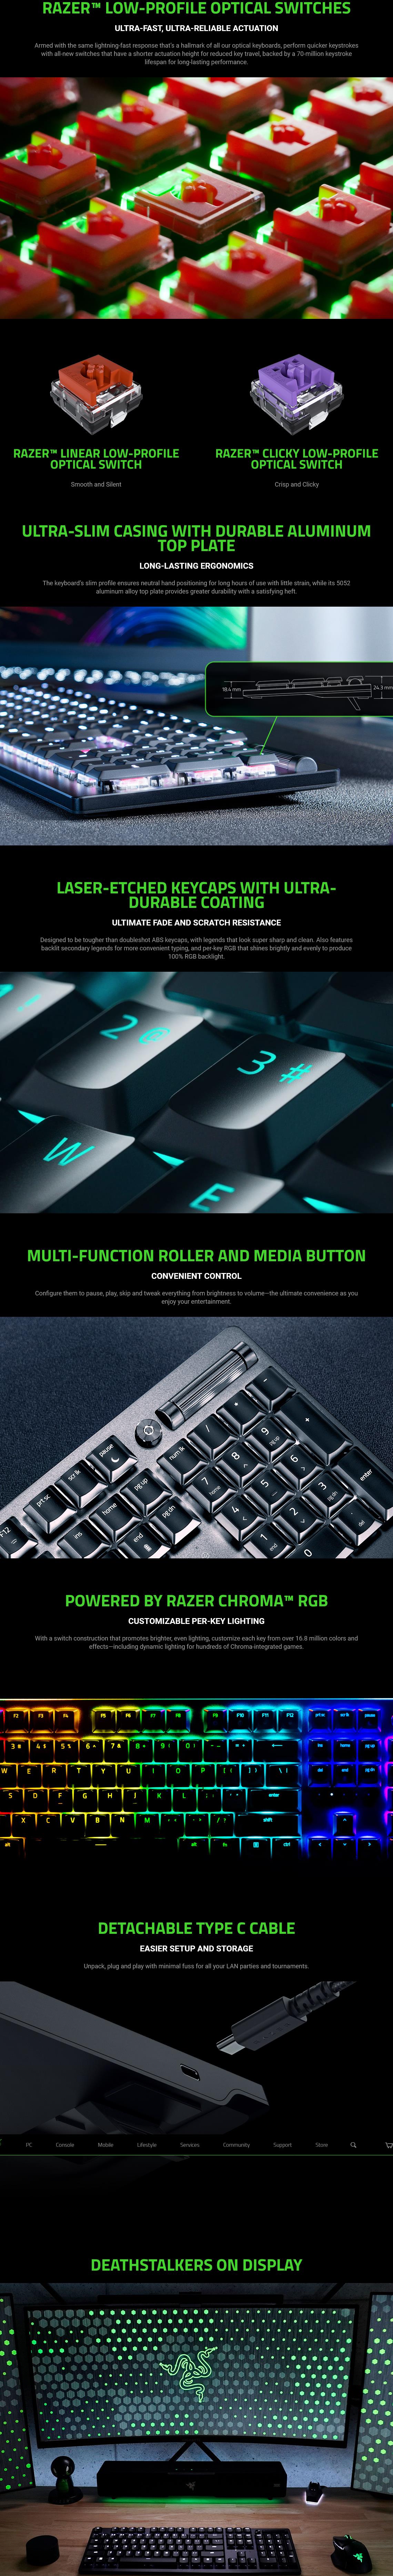 A large marketing image providing additional information about the product Razer DeathStalker V2 - Low Profile Optical Gaming Keyboard (Red Switch) - Additional alt info not provided